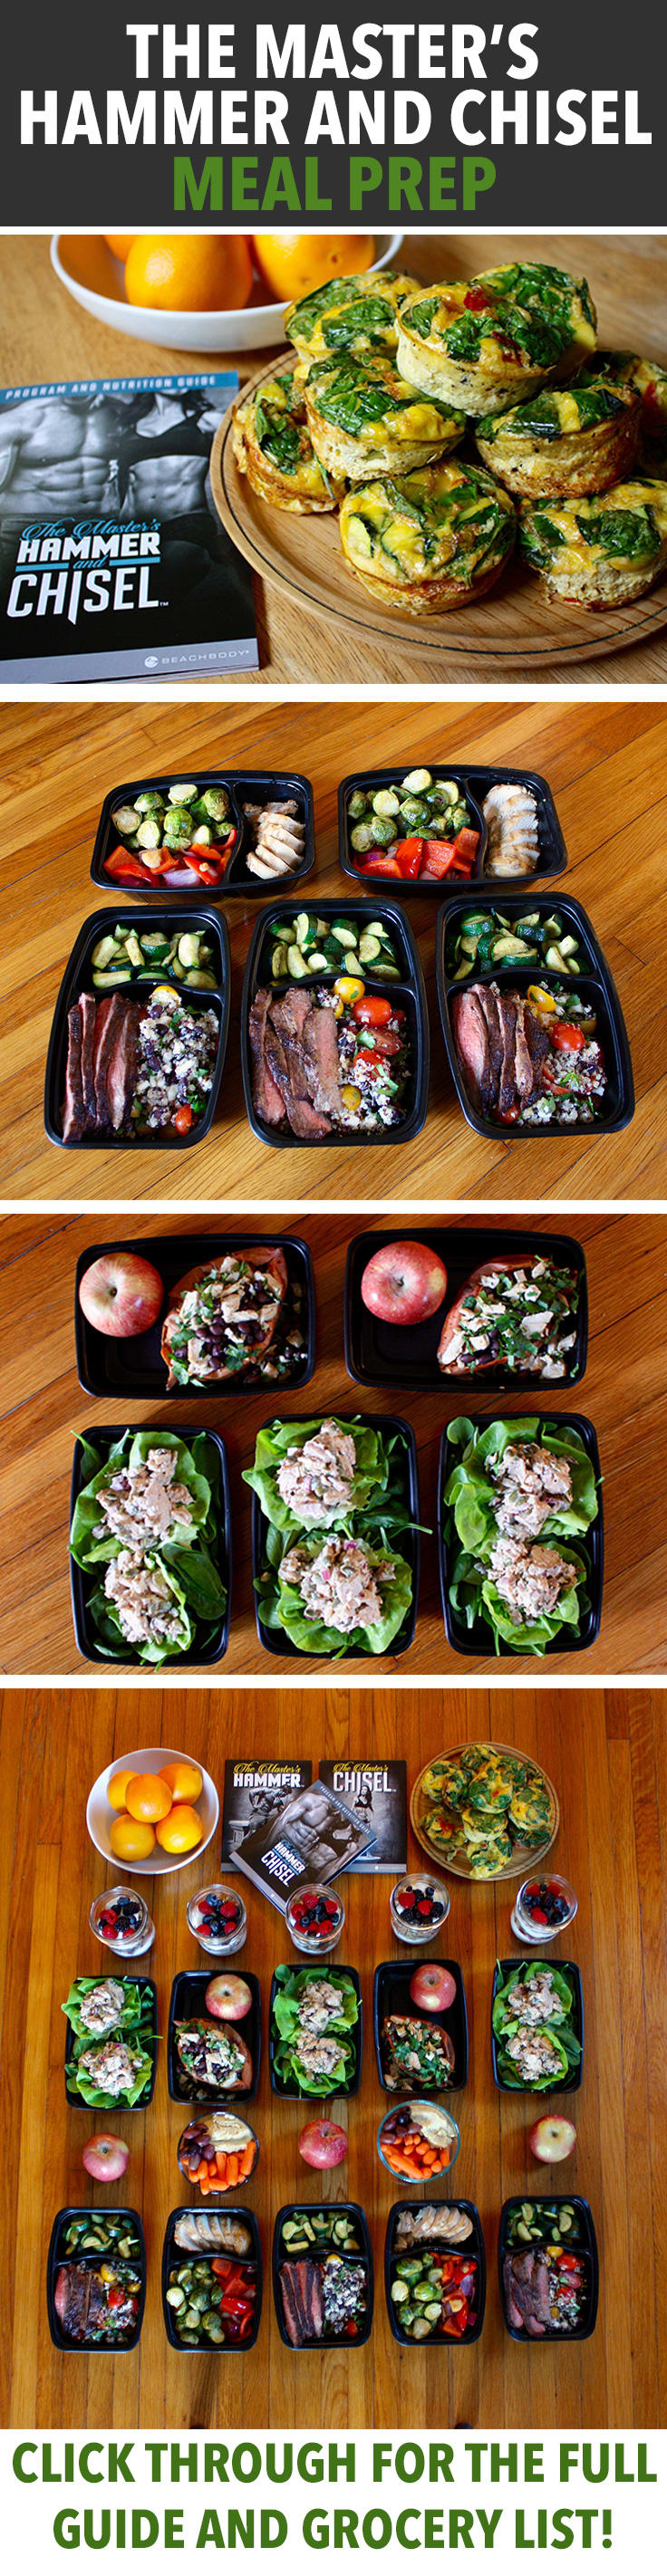 How to Meal Prep for The Master's Hammer and Chisel